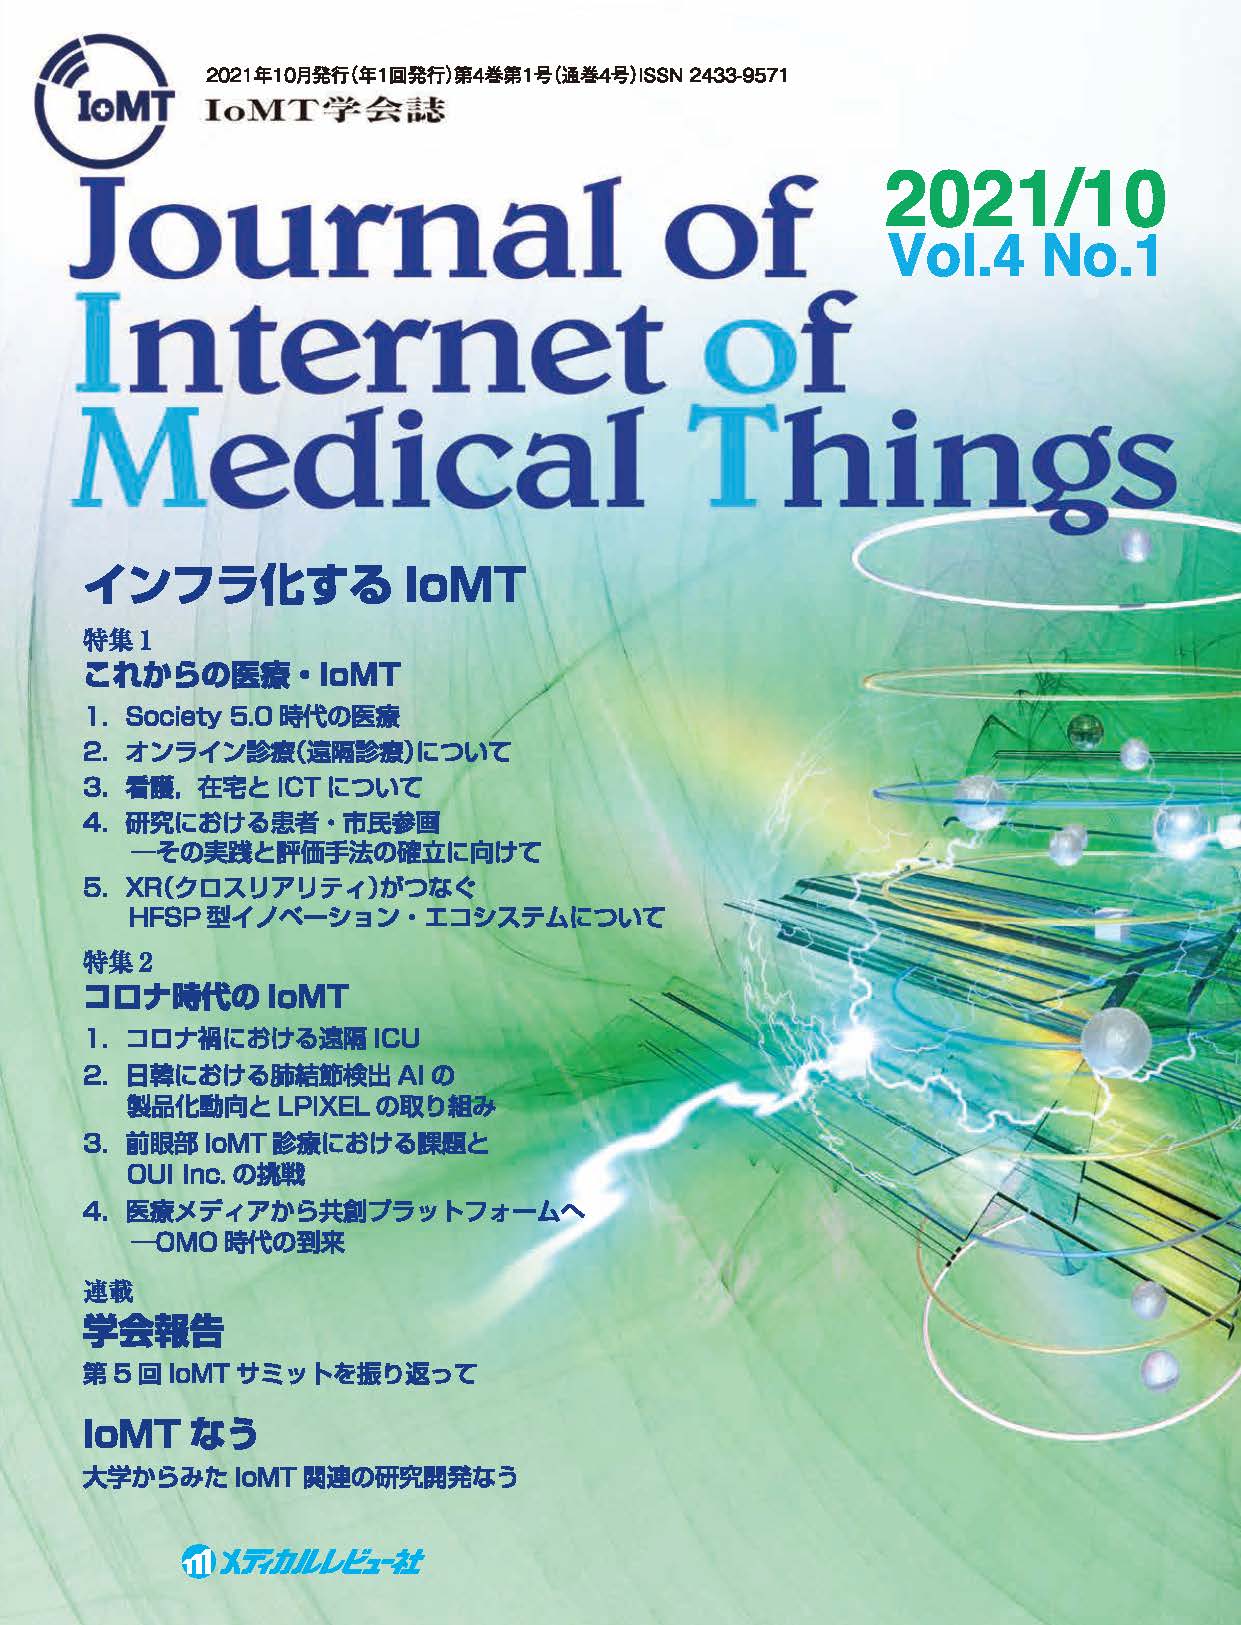 Journal of Internet of Medical Things 2021年10月号（Vol.4 No.1）